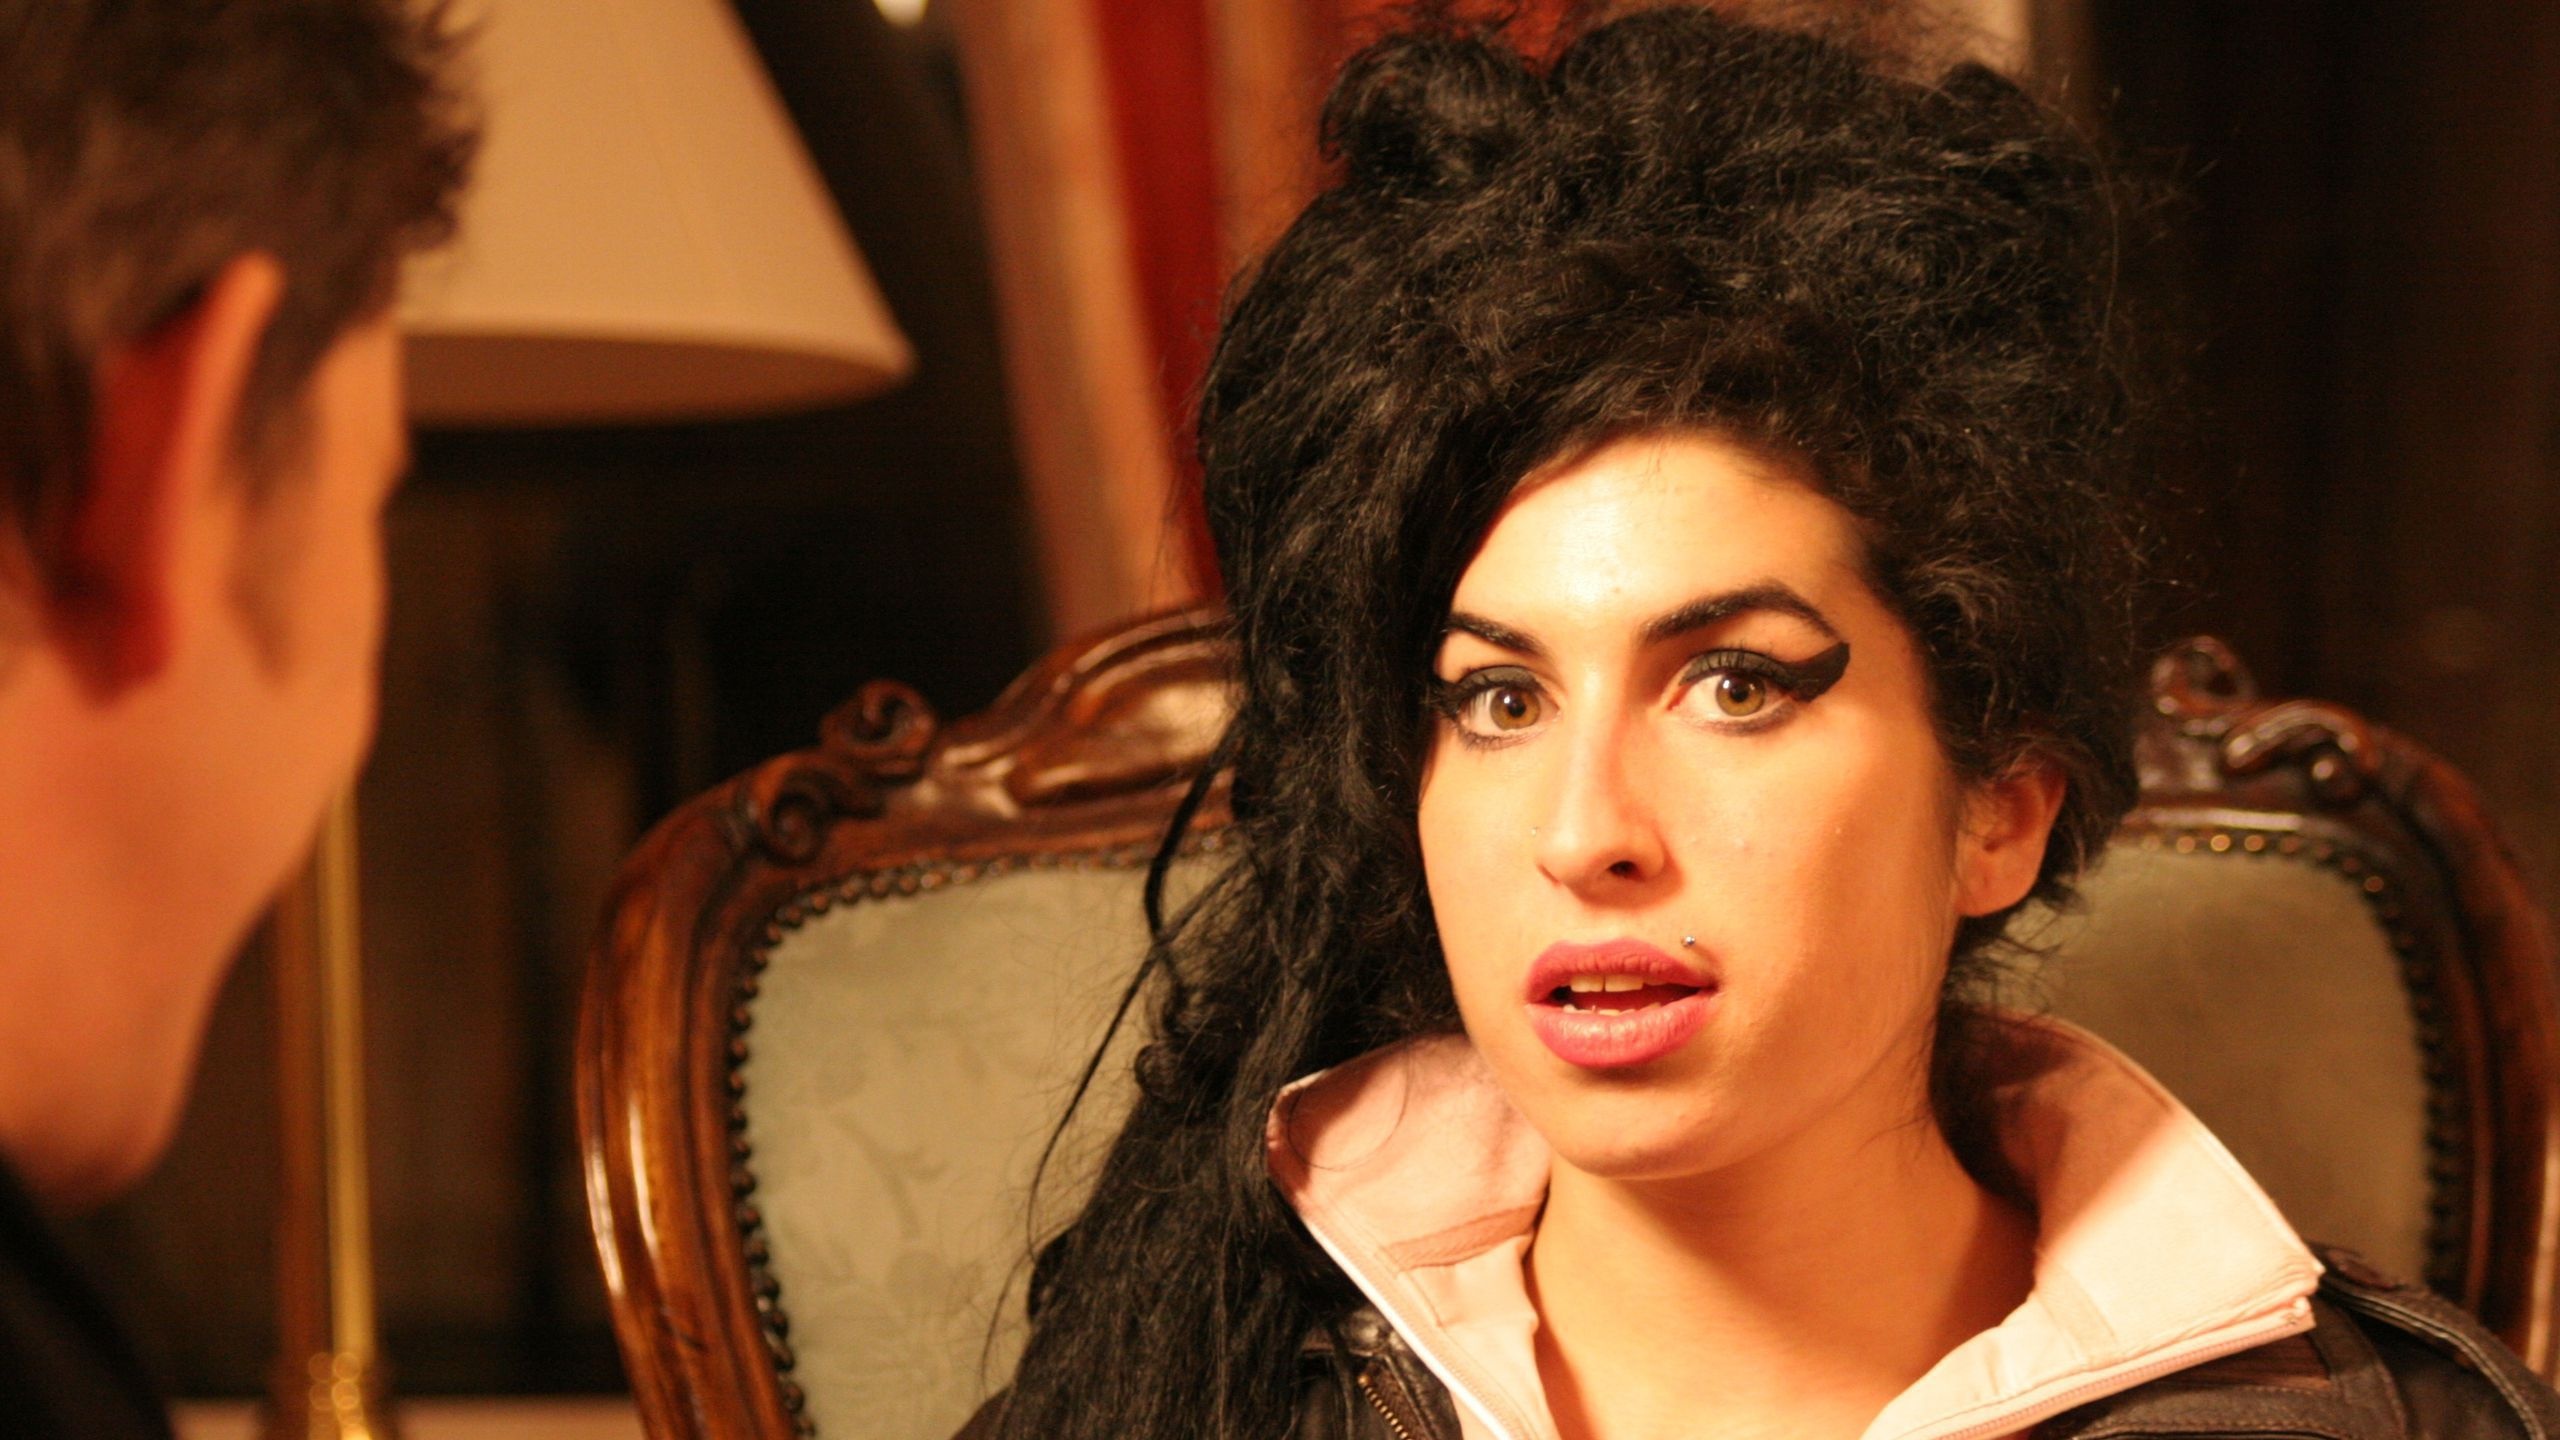 Amy Winehouse, Full HD wallpapers, Crystal clear images, 2560x1440 HD Desktop